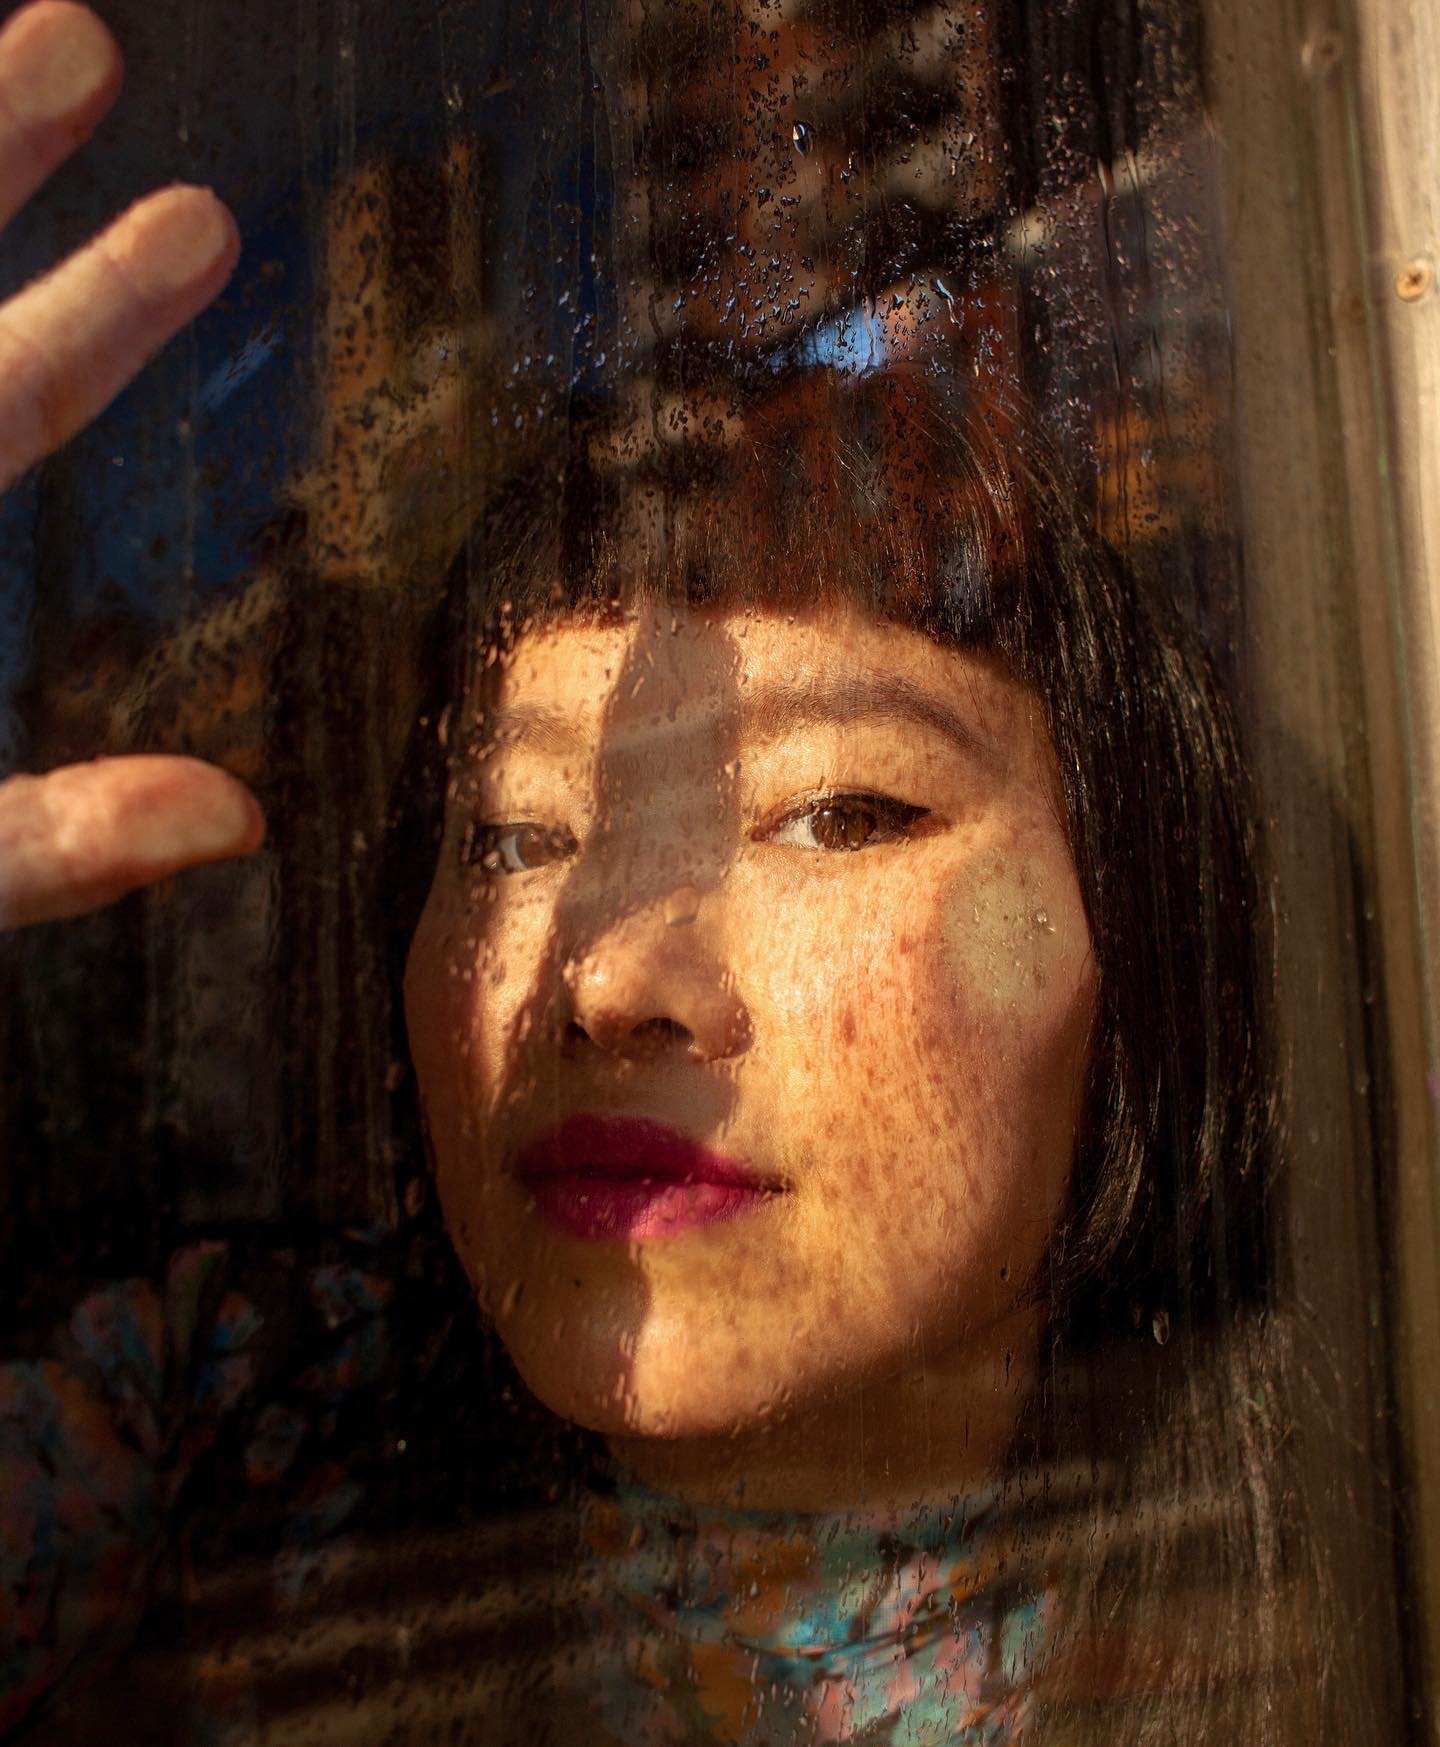 Charmaine Lee is photographed through a window, her cheek and fingers touching the glass, looking at the camera